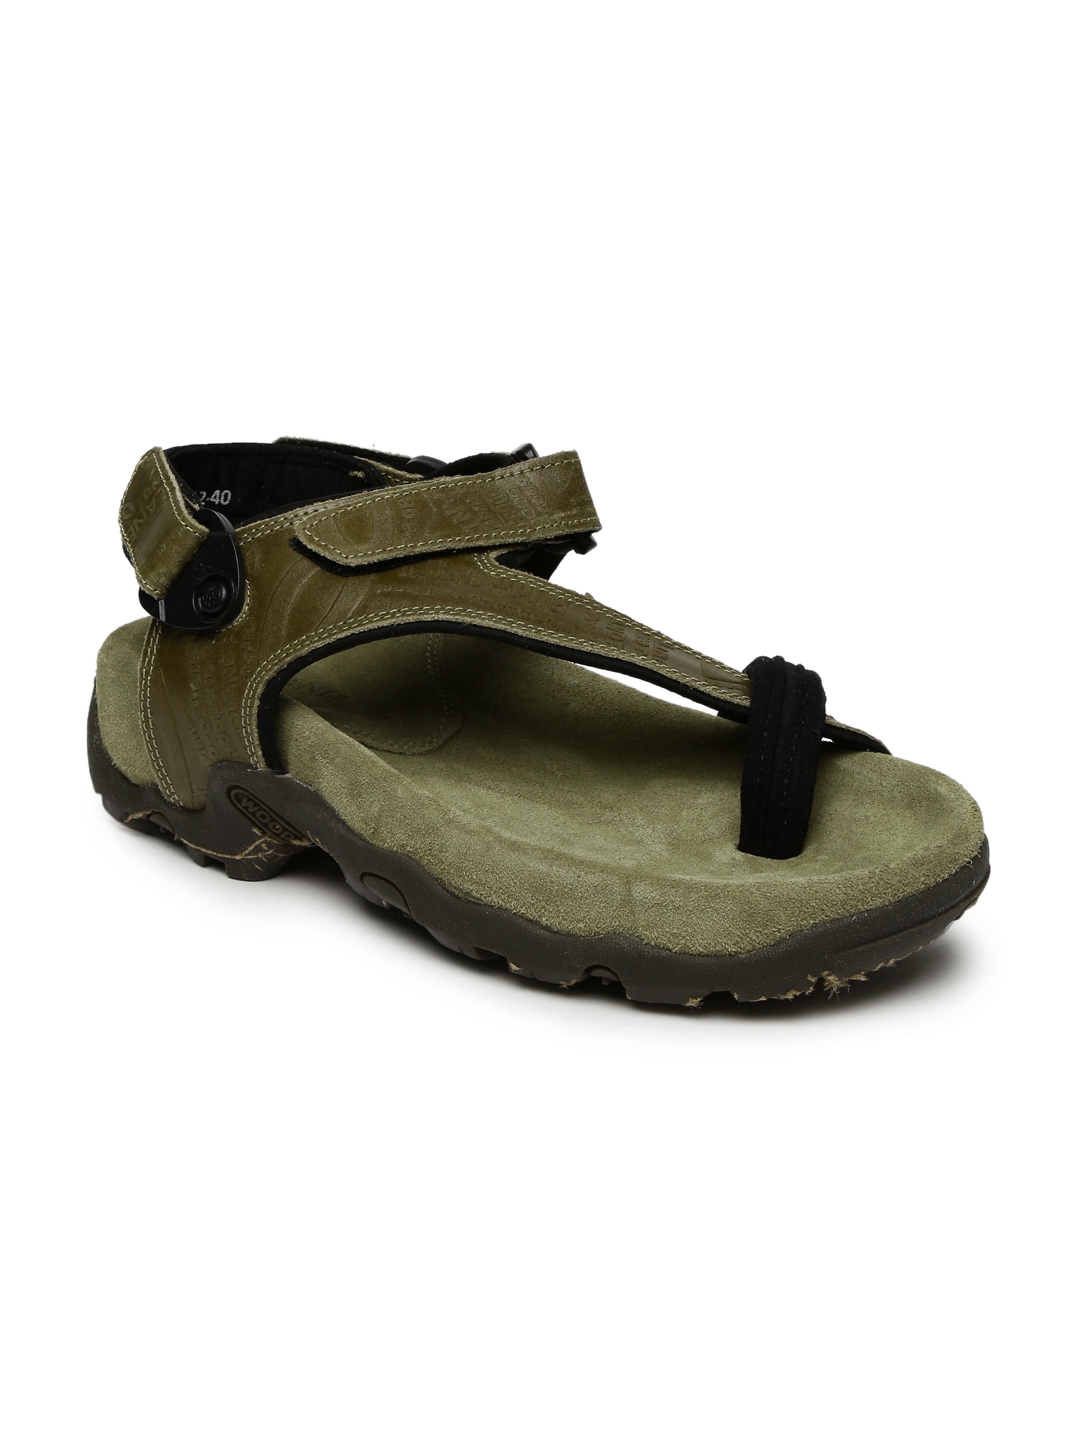 Campus Sandals : Buy Campus Gc-2305 Green Mens Sandals Online | Nykaa  Fashion